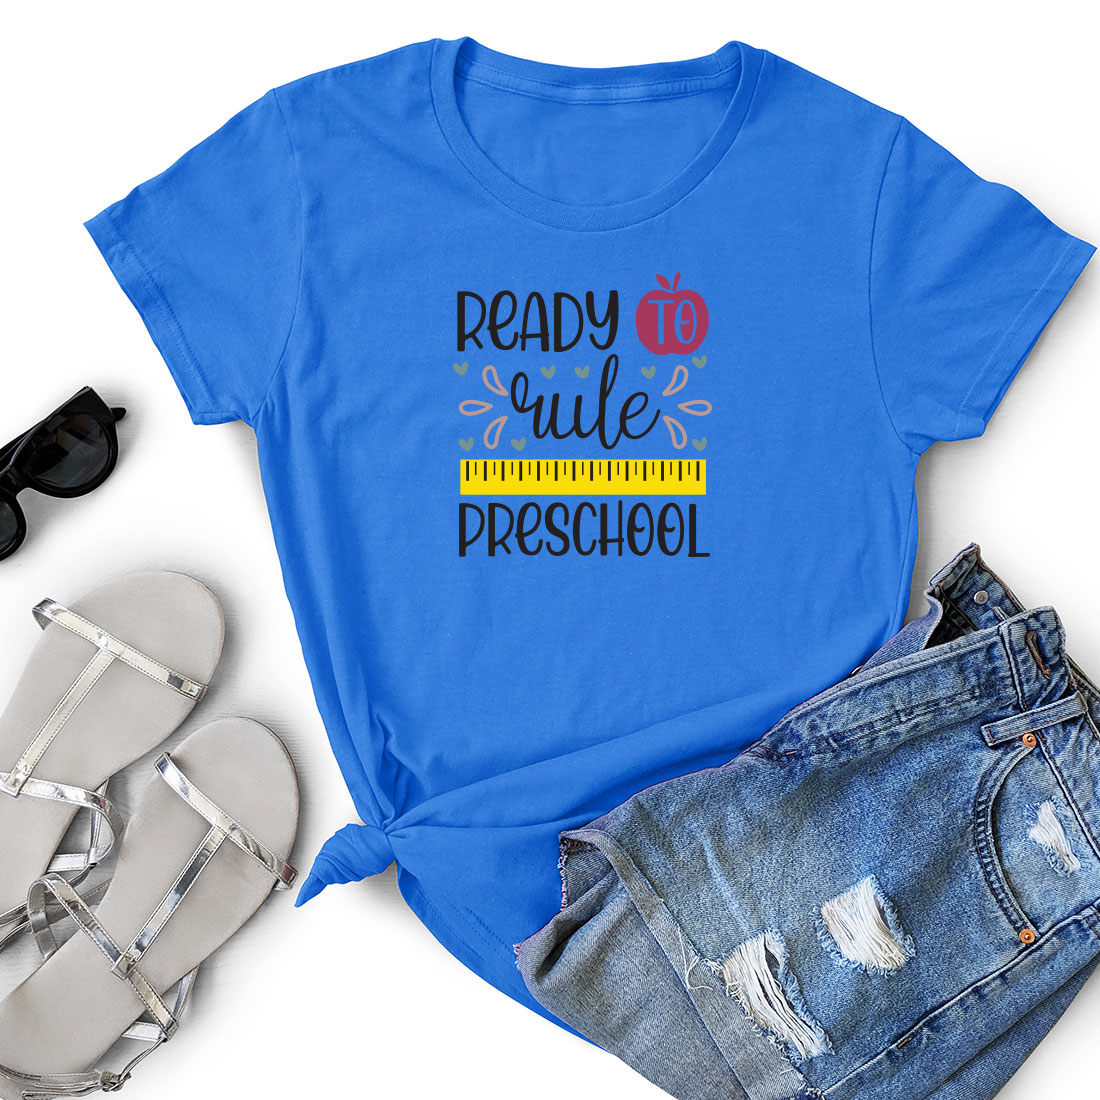 T - shirt that says ready to be a preschool.